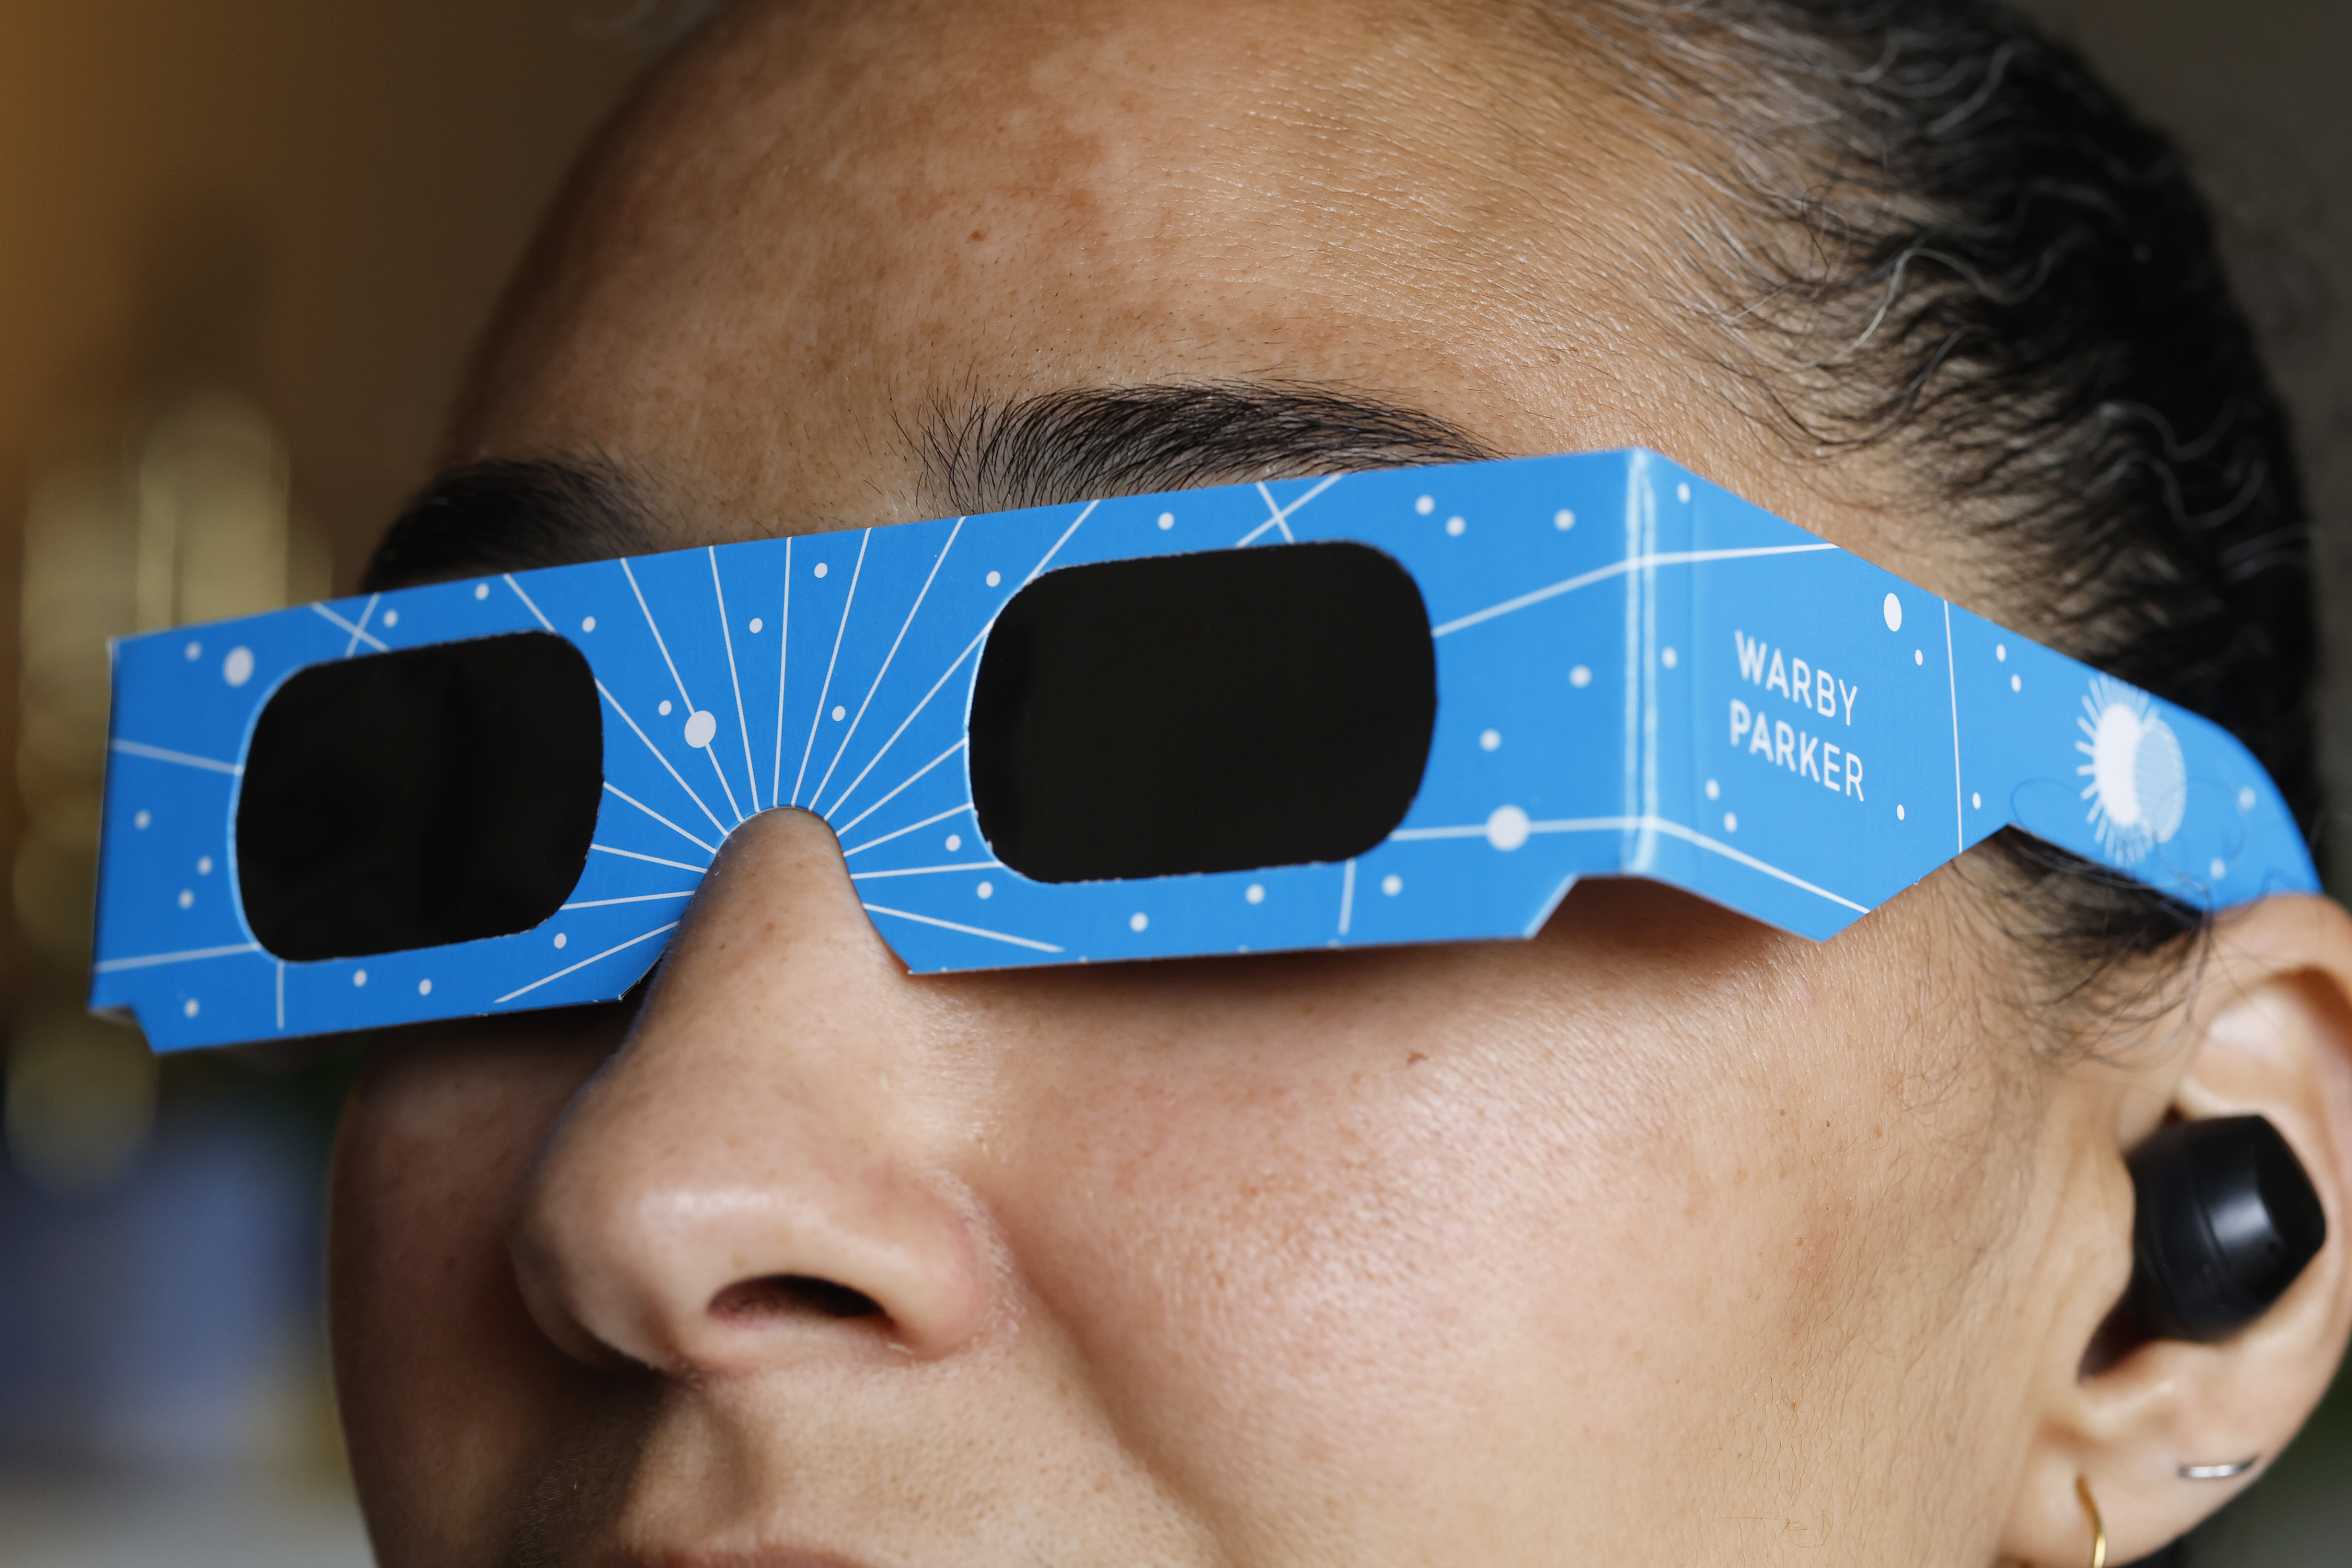 NEWSLINE: NY astronomer previews Monday's once-in-a-lifetime eclipse